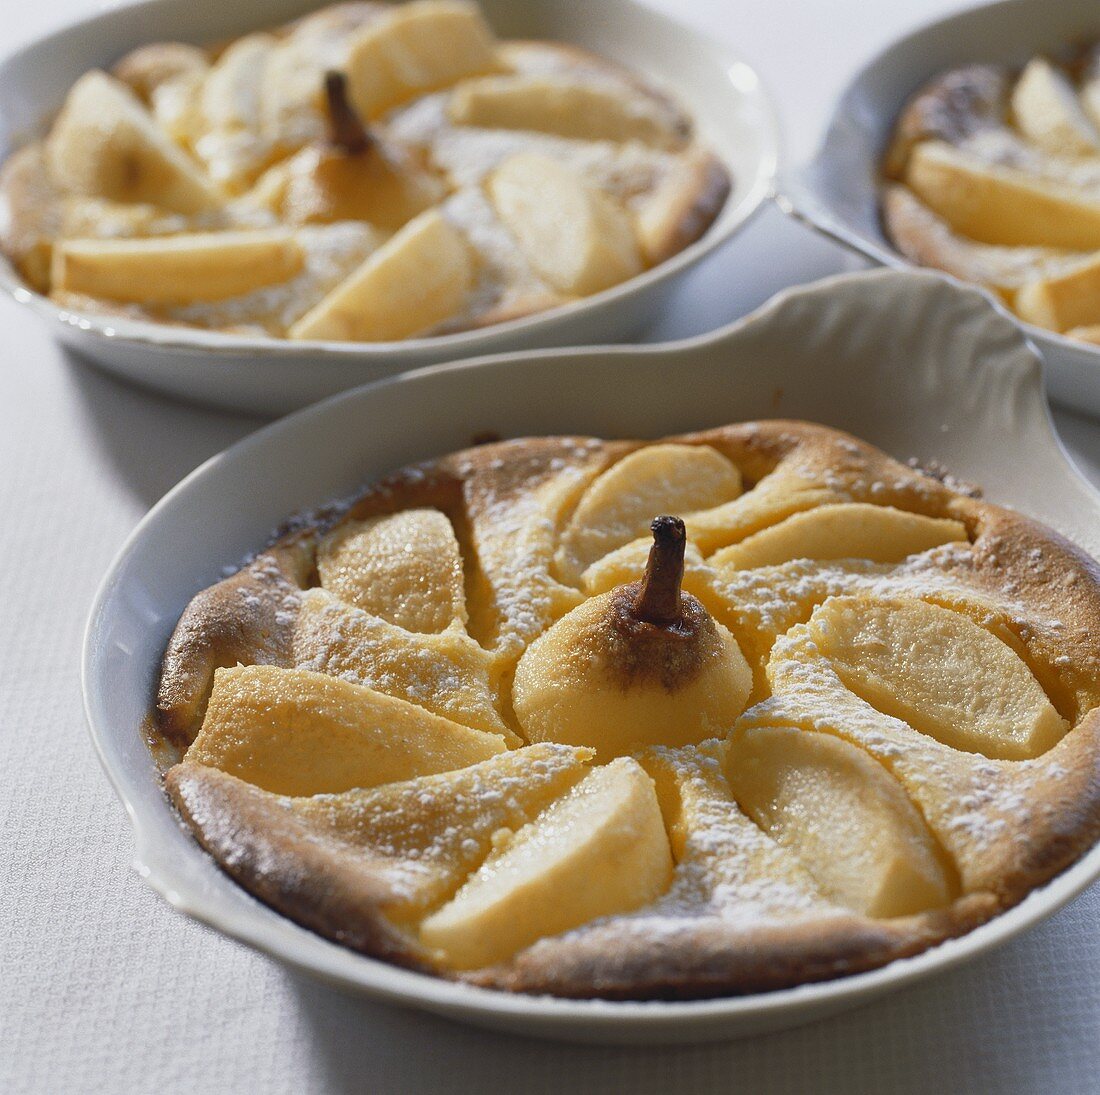 Pear pudding in baking dishes